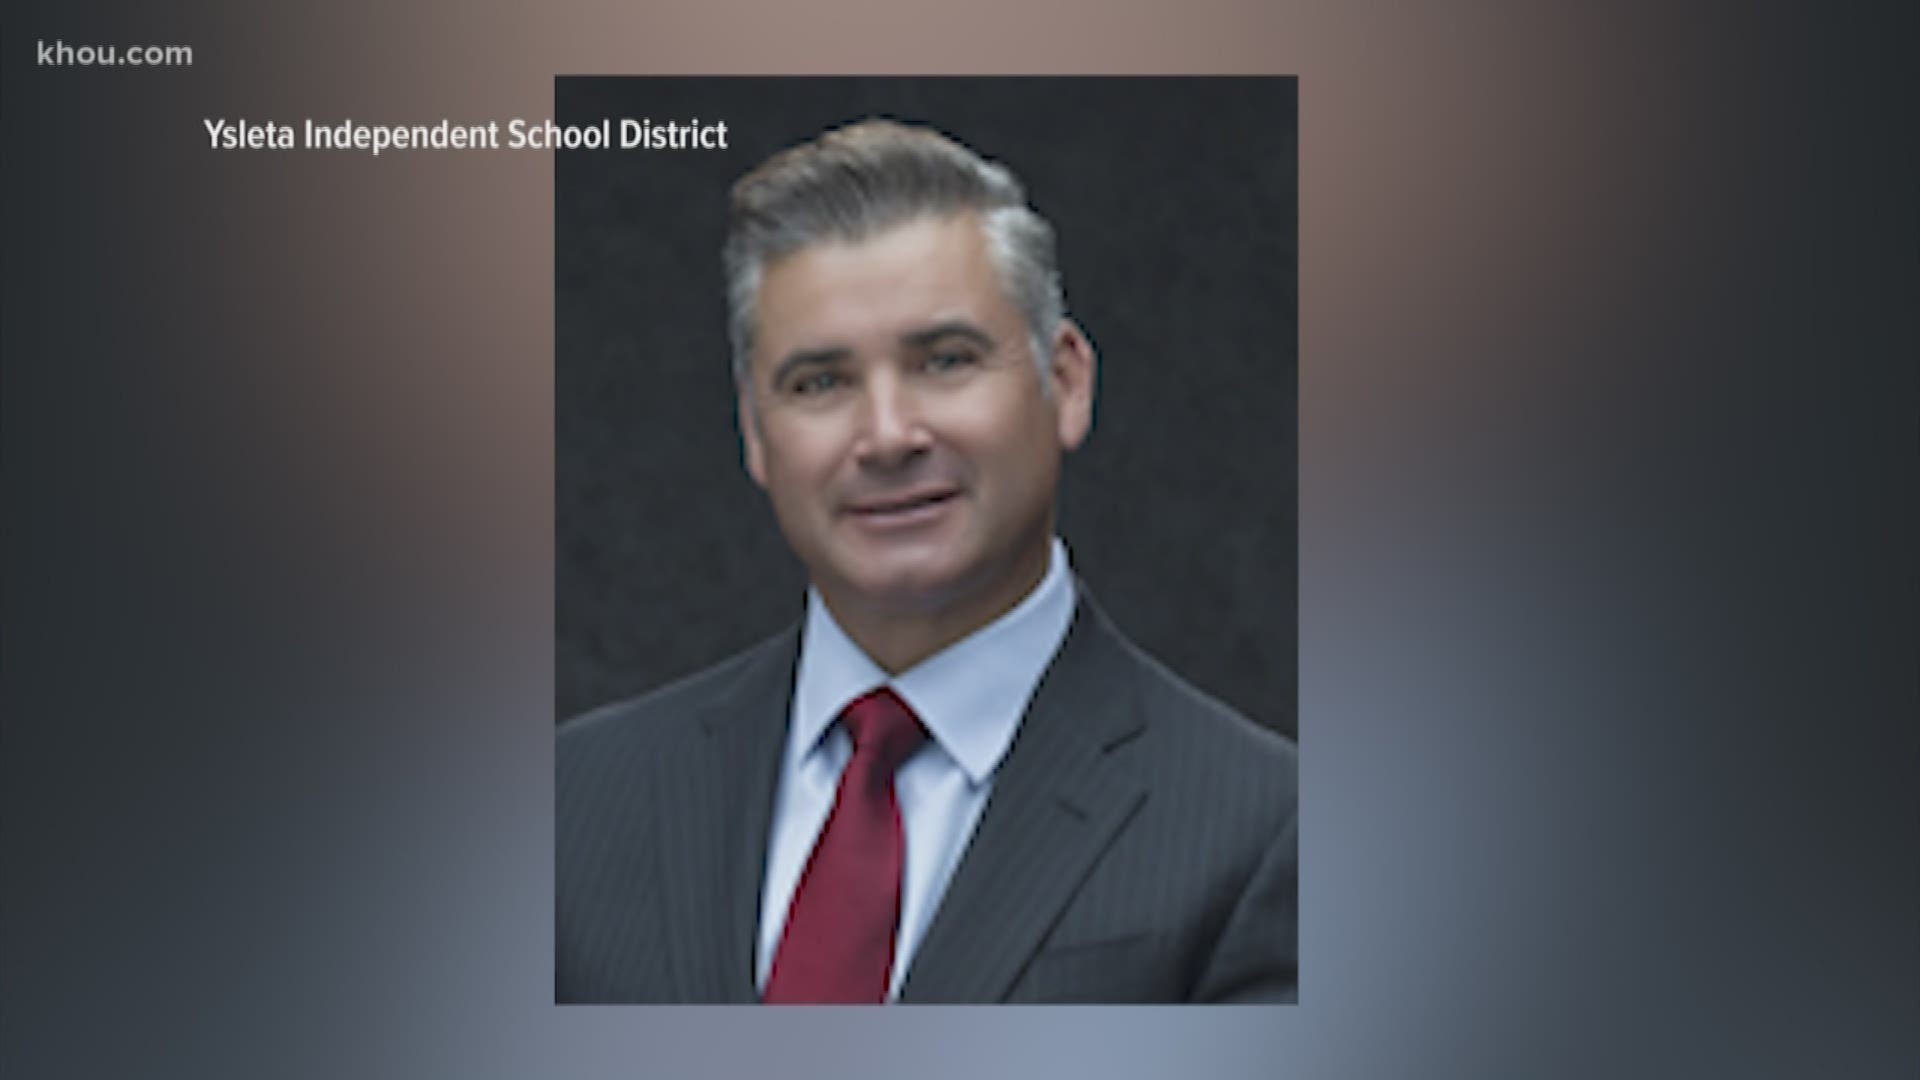 An El Paso school district has suspended its superintendent after San Antonio police reported he was inebriated at a Whataburger when he head-butted another superintendent.